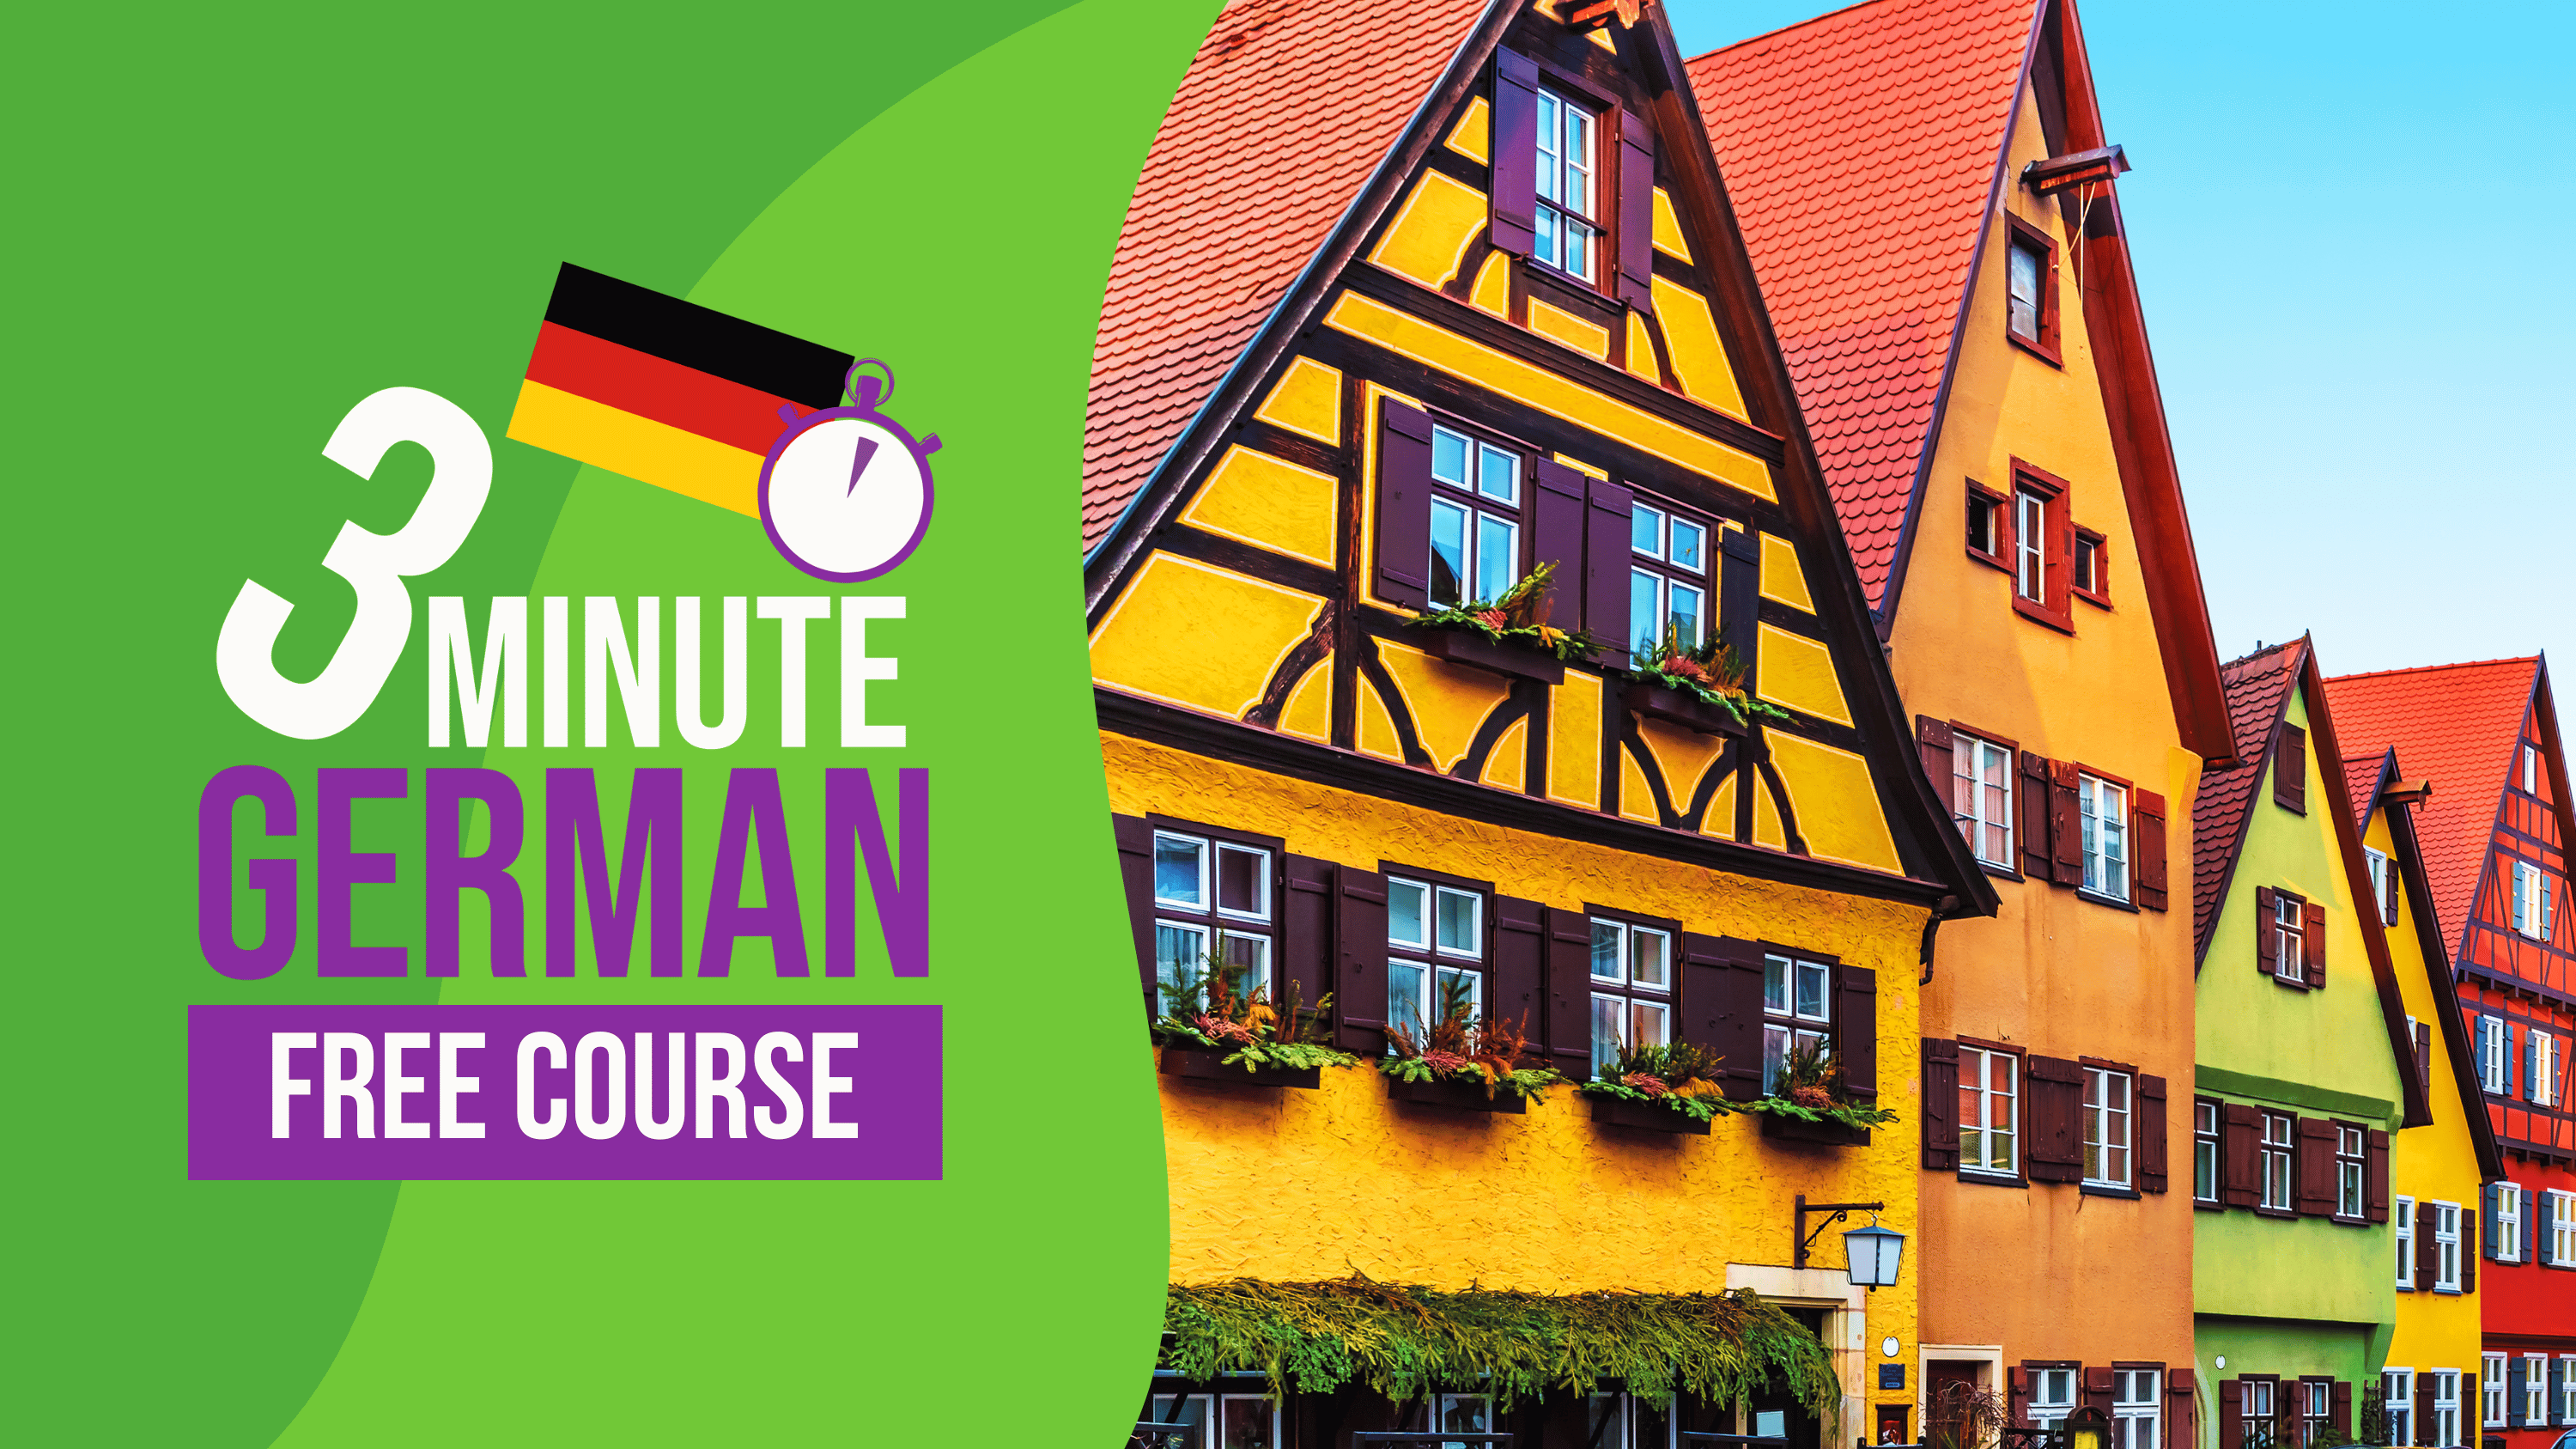 3 Minute German - Free course